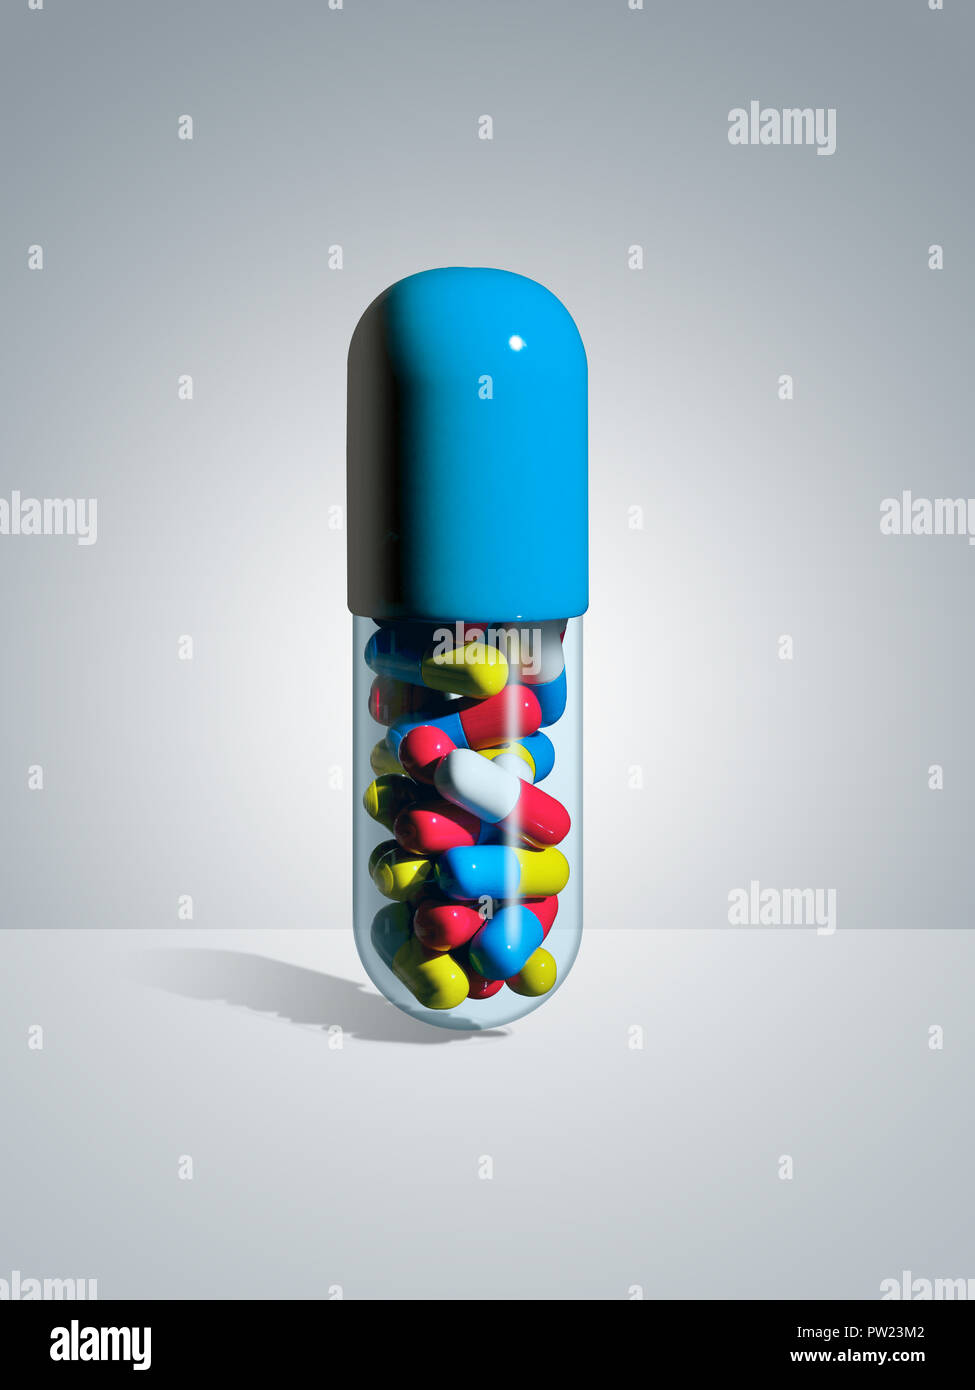 Concept A Blue Pill Filled with Smaller Color Pills, Overmedicated, Over Prescribed,  Drug Abuse, Hidden, Drug Cocktail Stock Photo